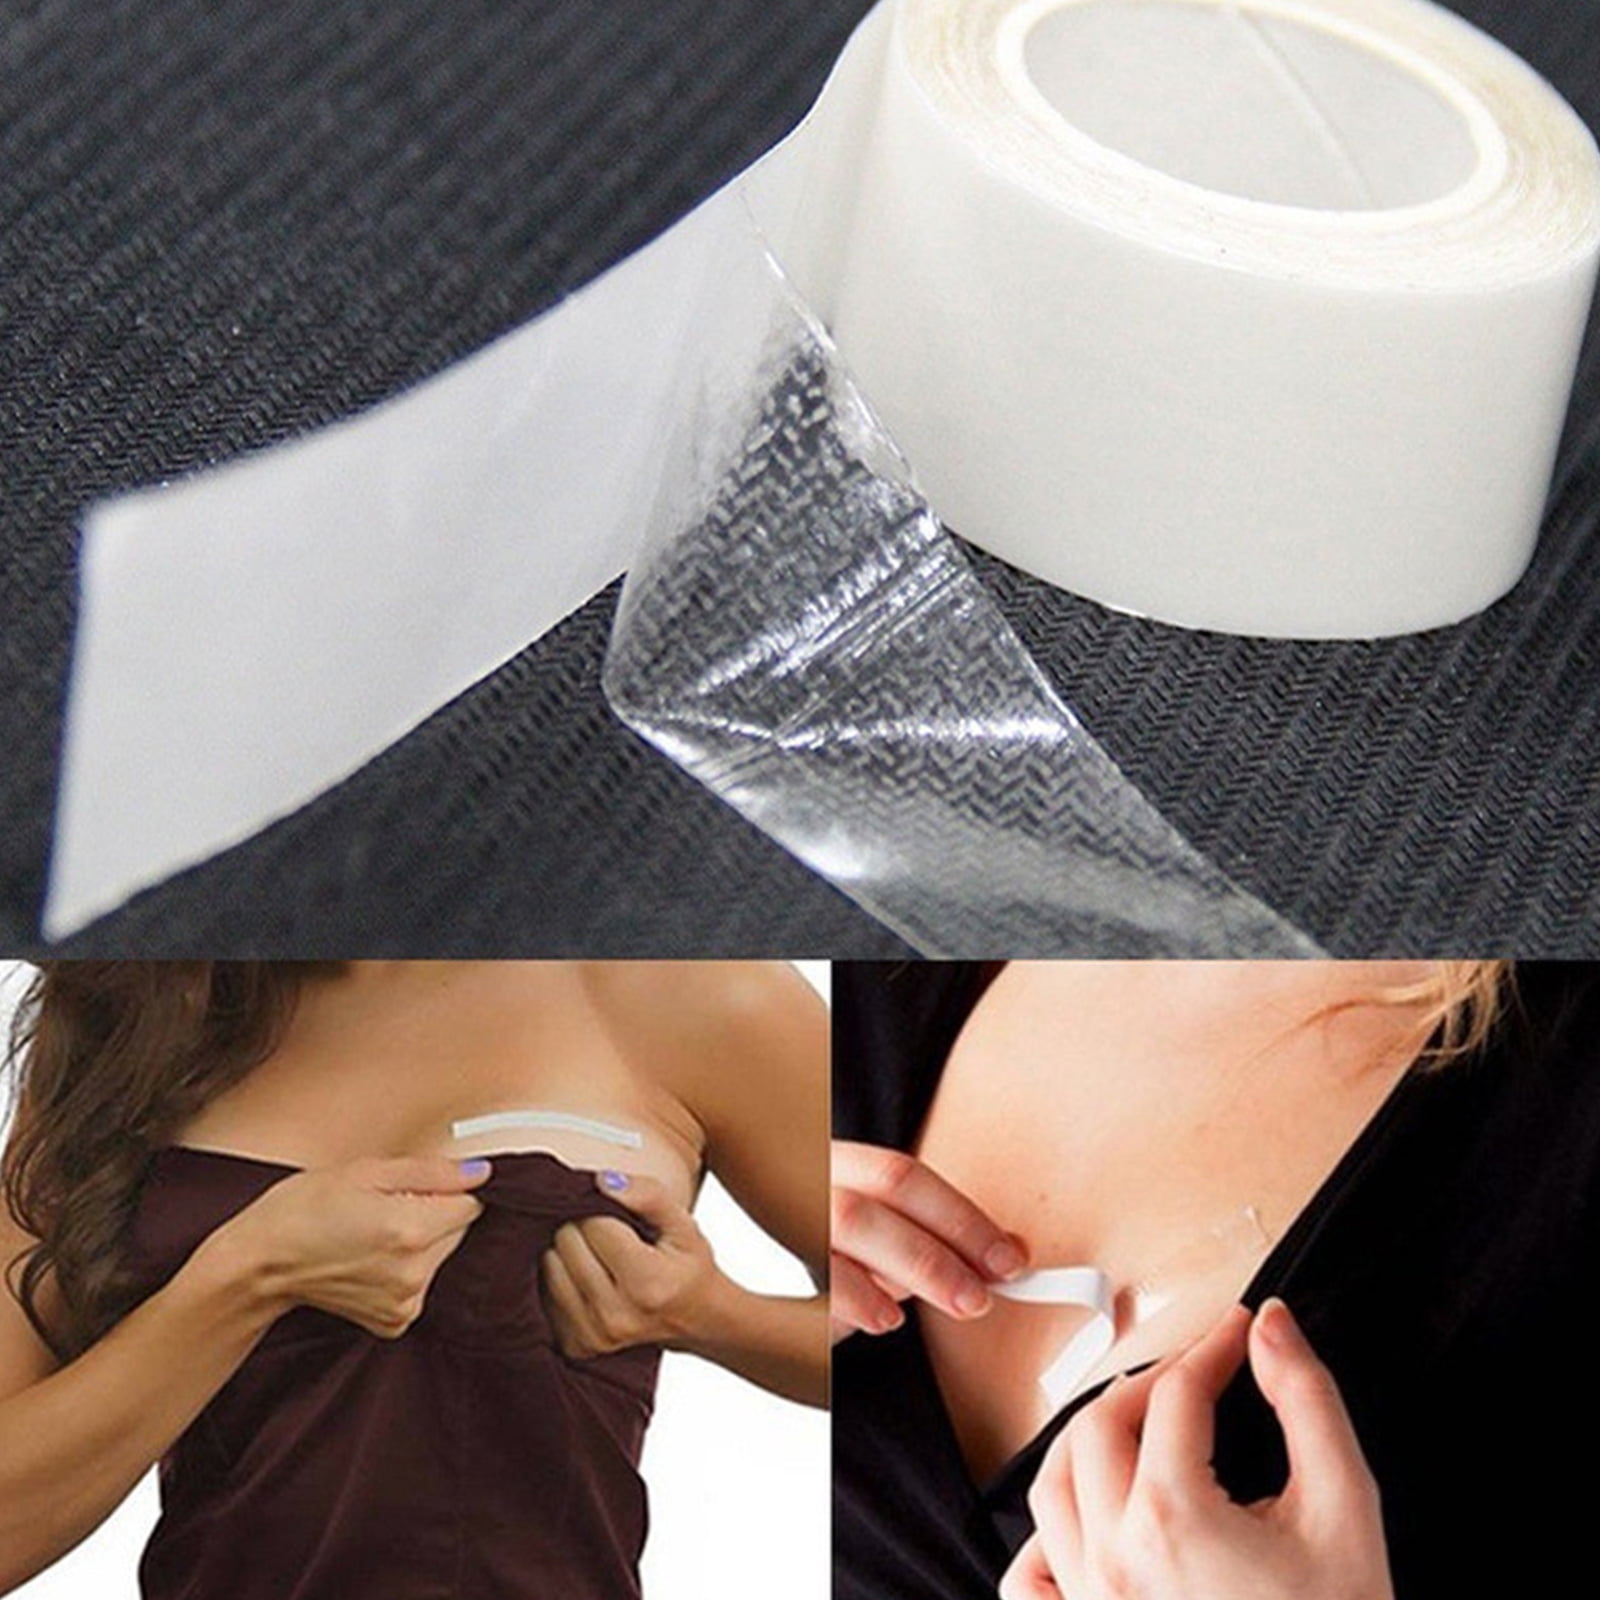 Women's Anti-light Luminous Dress Tape, Transparent Adhesive Strip Sticker  To Secure Clothes And Avoid Exposure, Pu Material